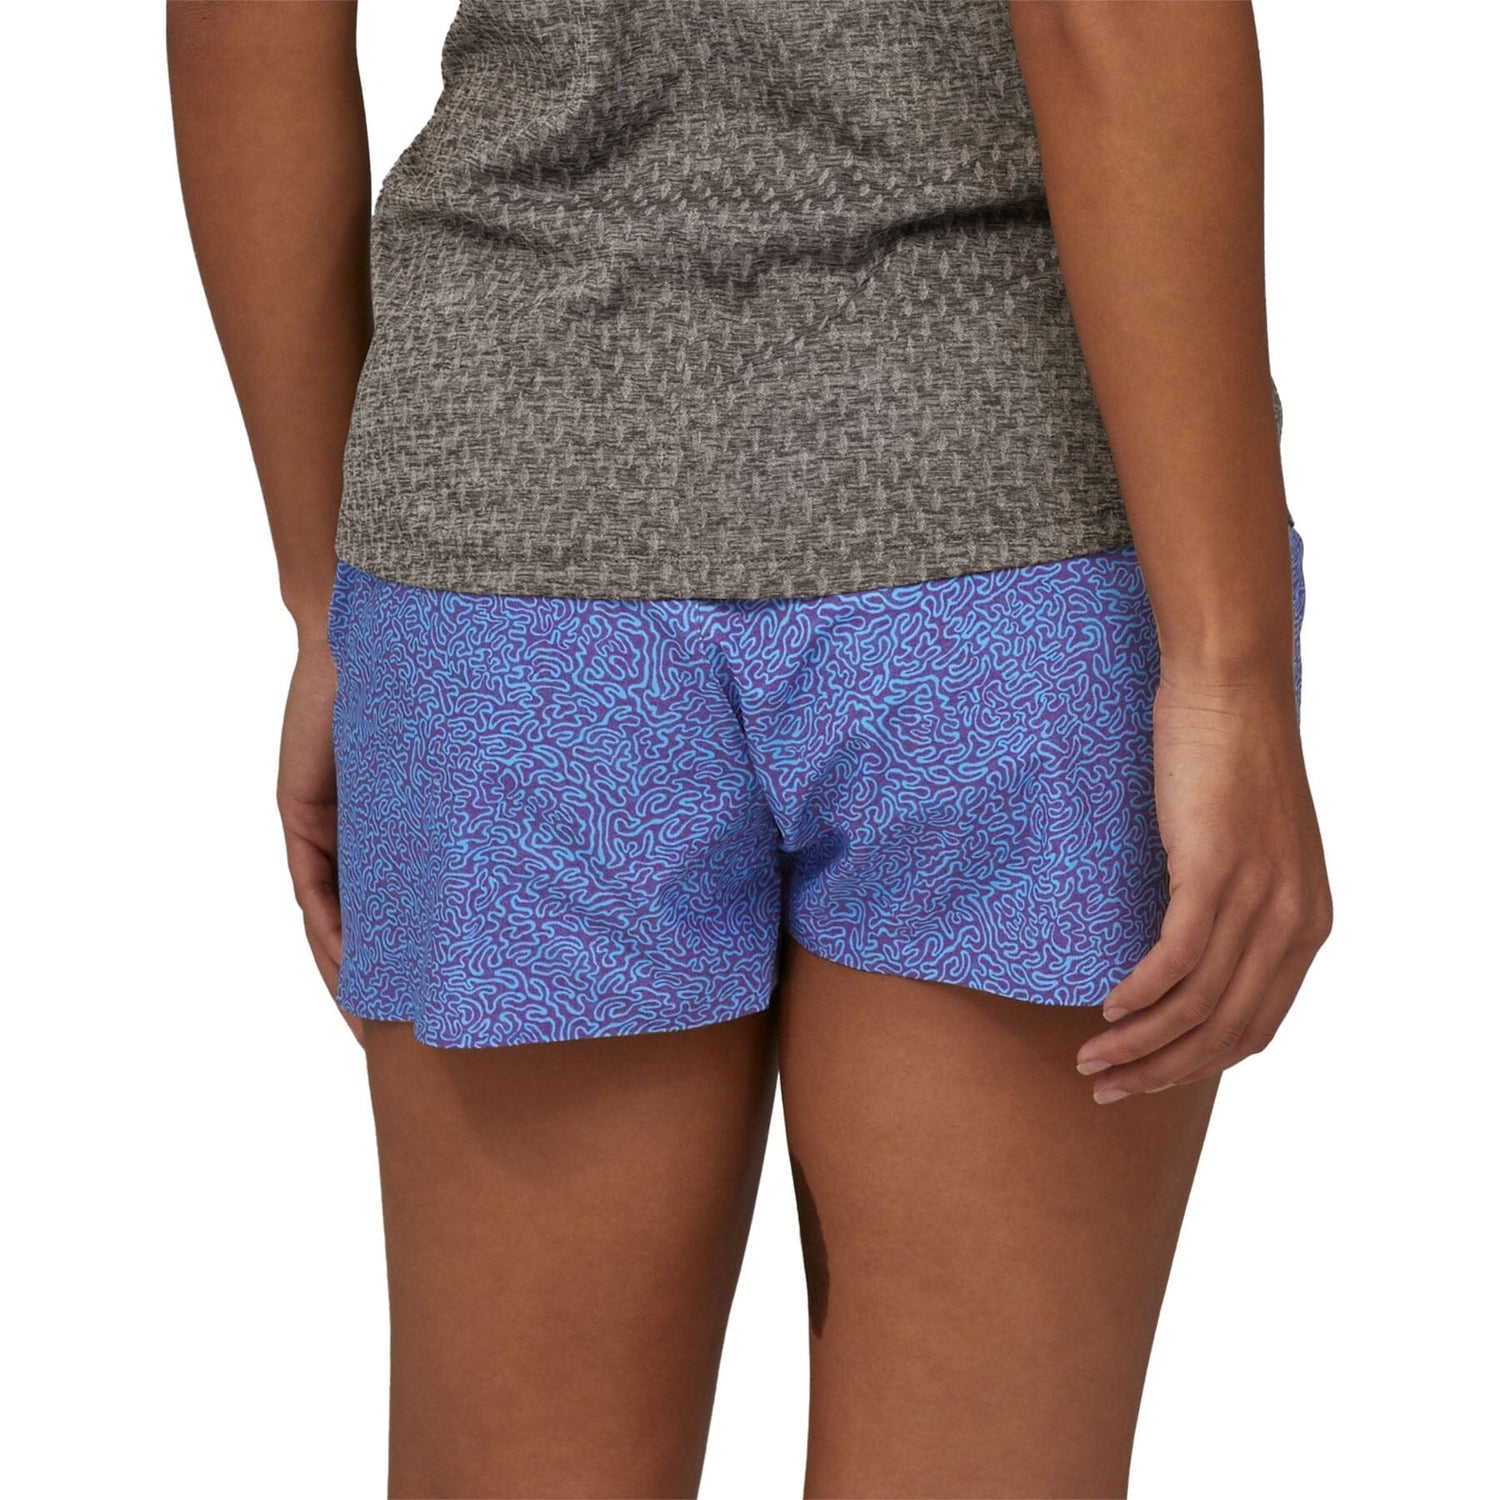 Patagonia - W's Strider Pro Shorts 3 1/2'' - Recycled polyester - Weekendbee - sustainable sportswear